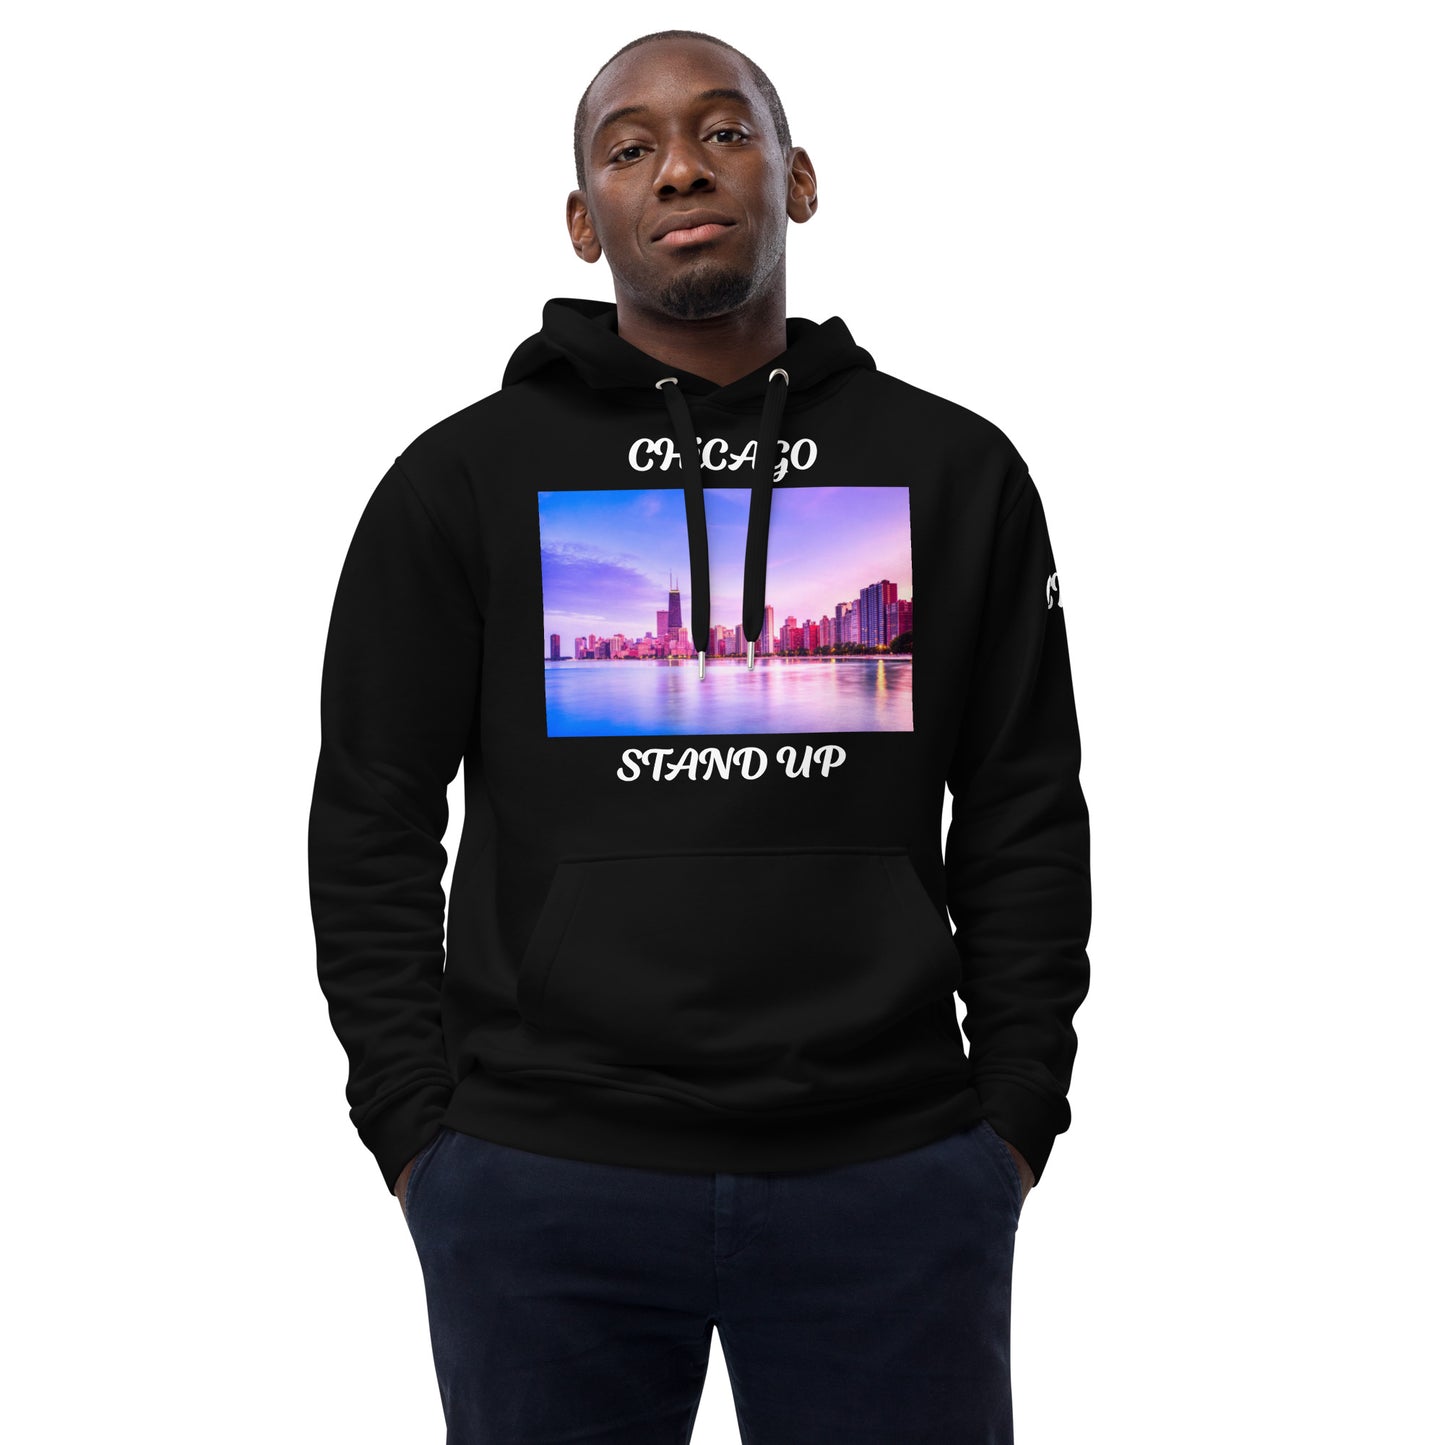 CHICAGO, Stand Up HOODIE